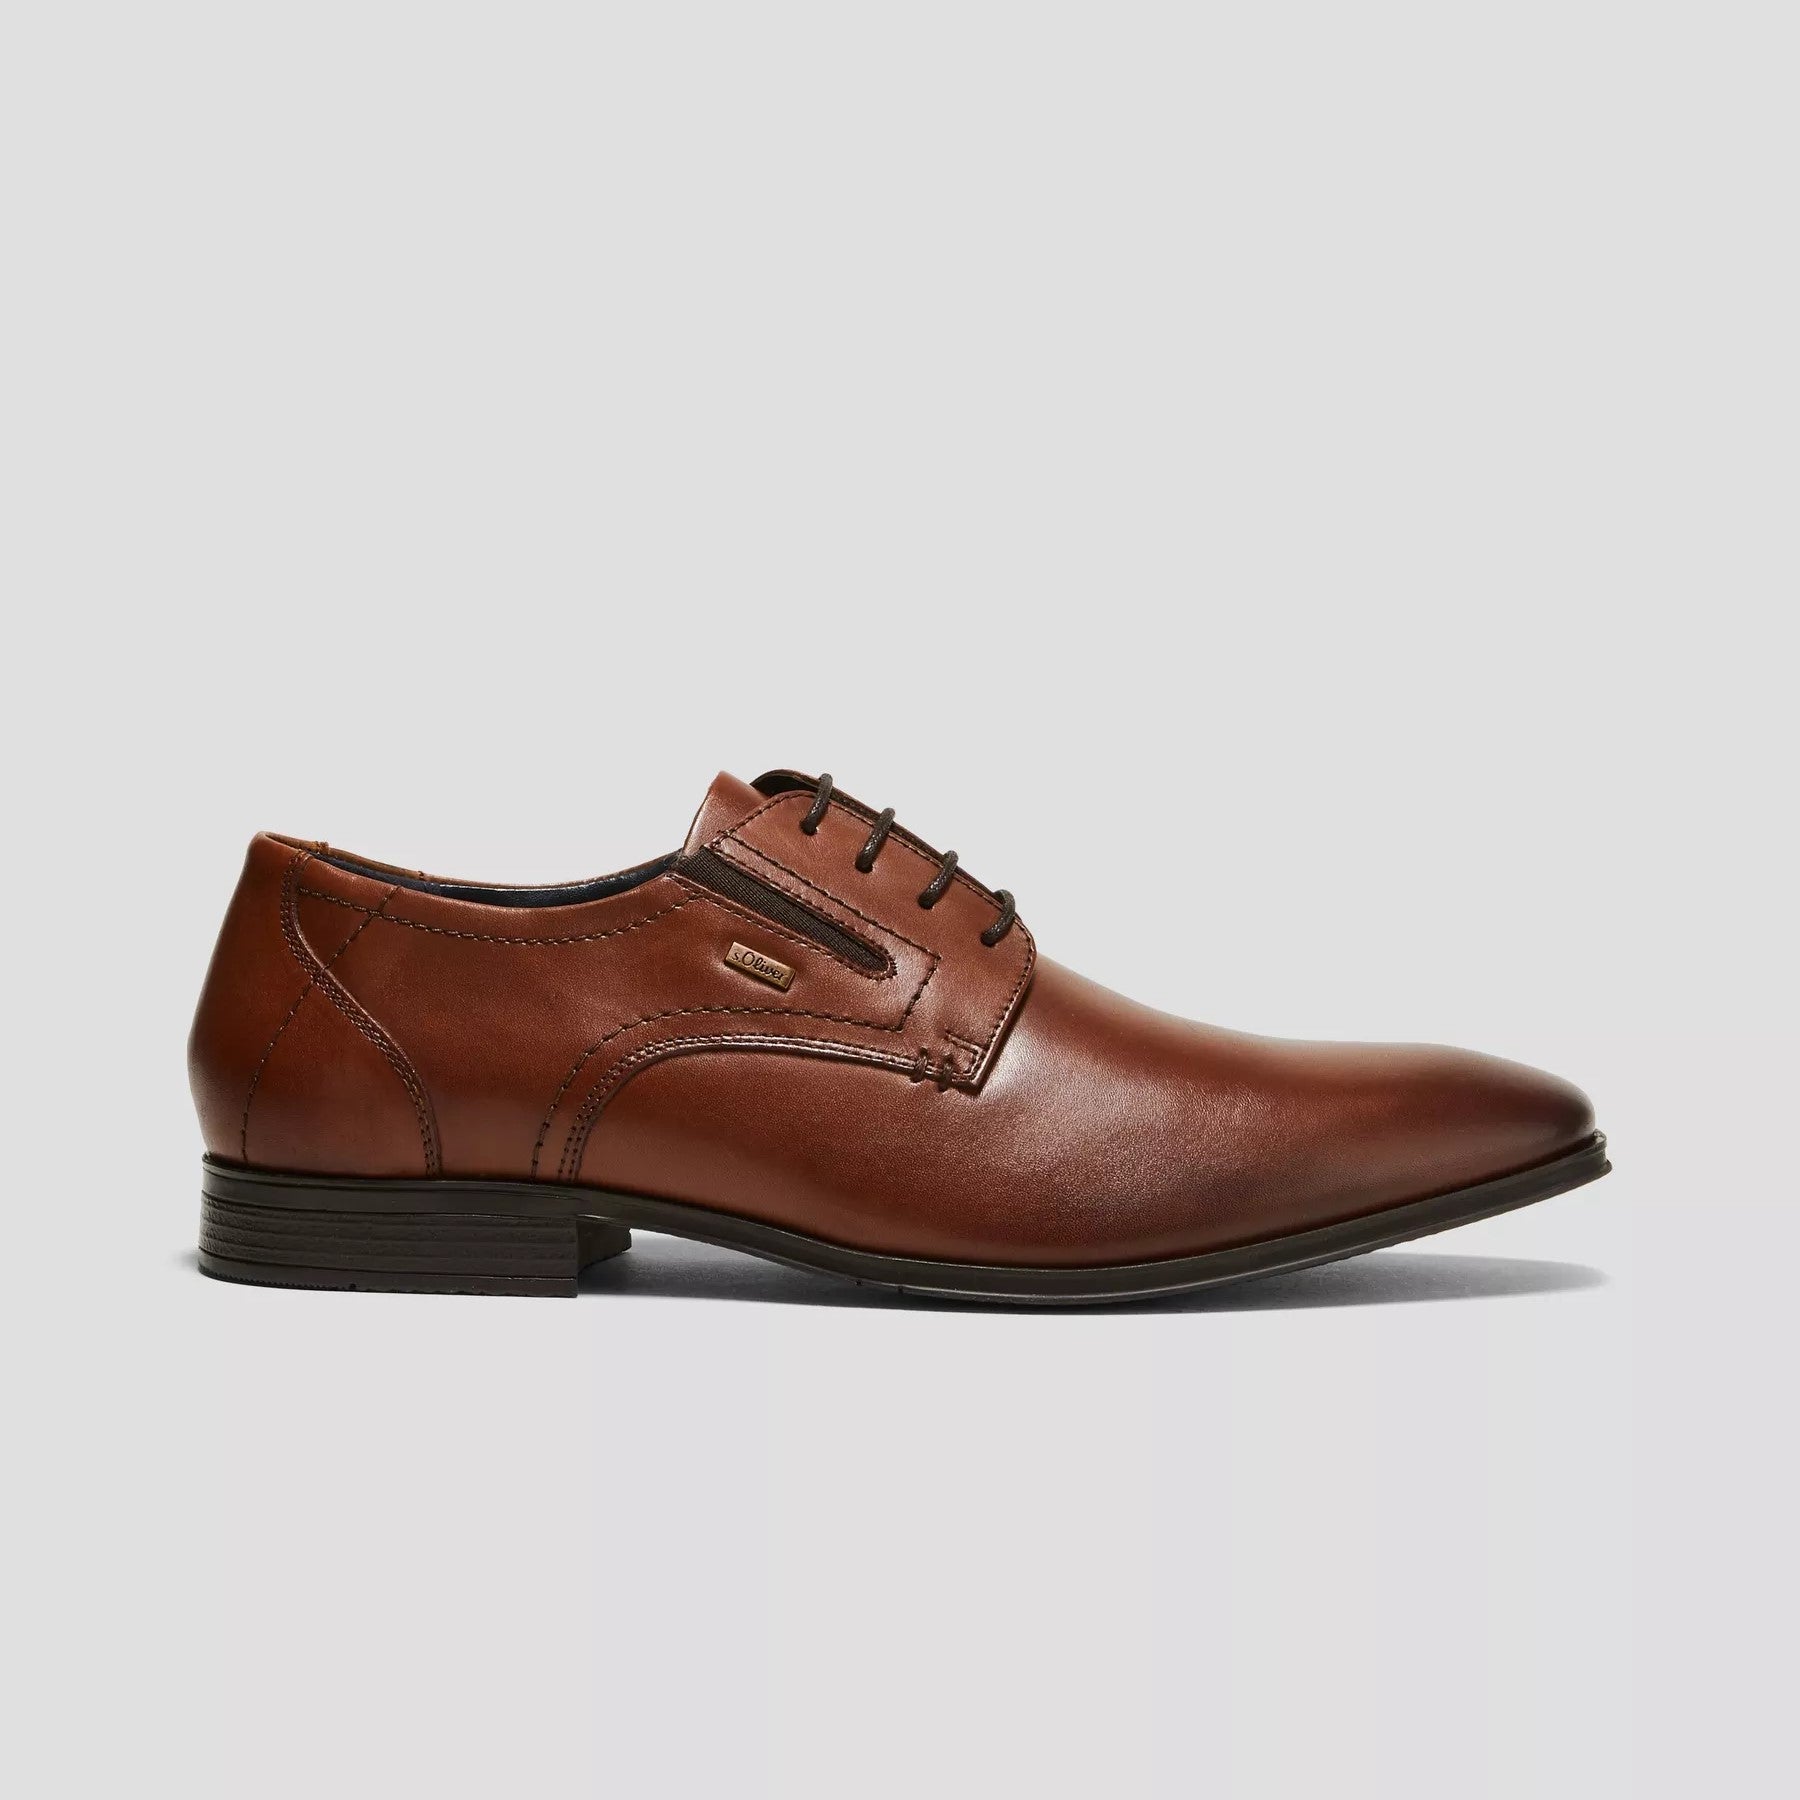 Men's Classic Lace-Up Shoes in Leather